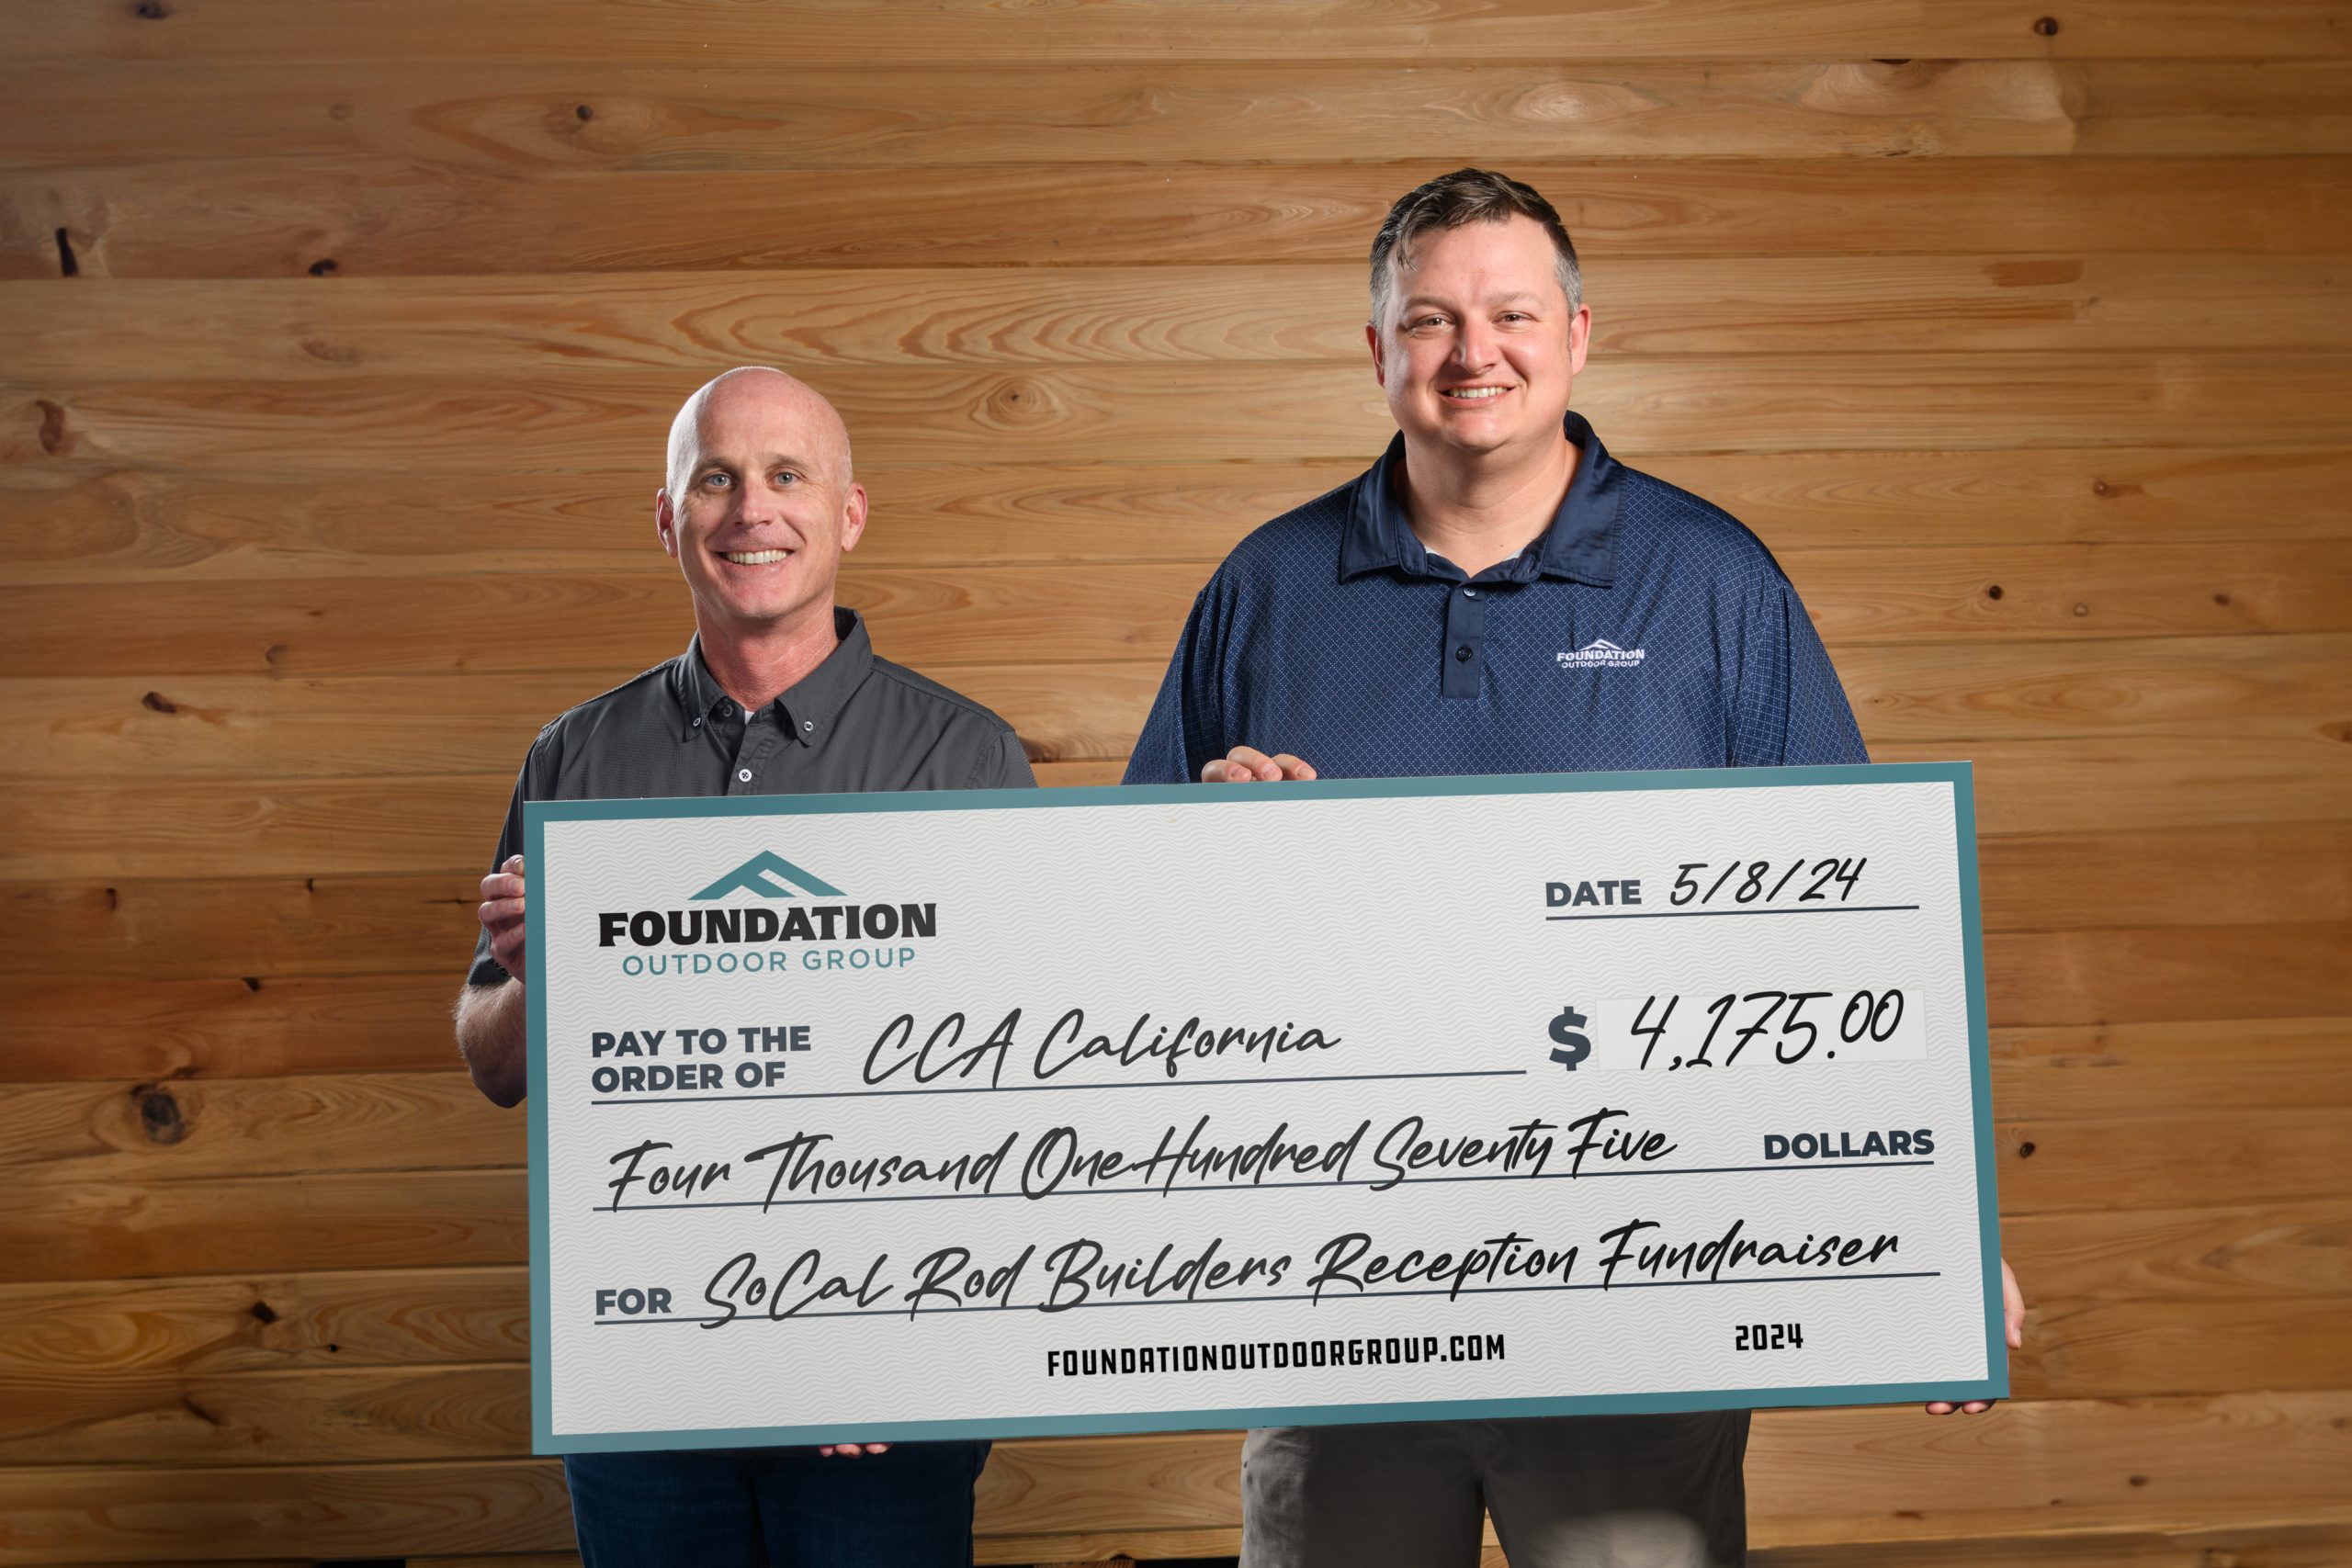 Foundation Outdoor Group Donates Proceeds to CCA California